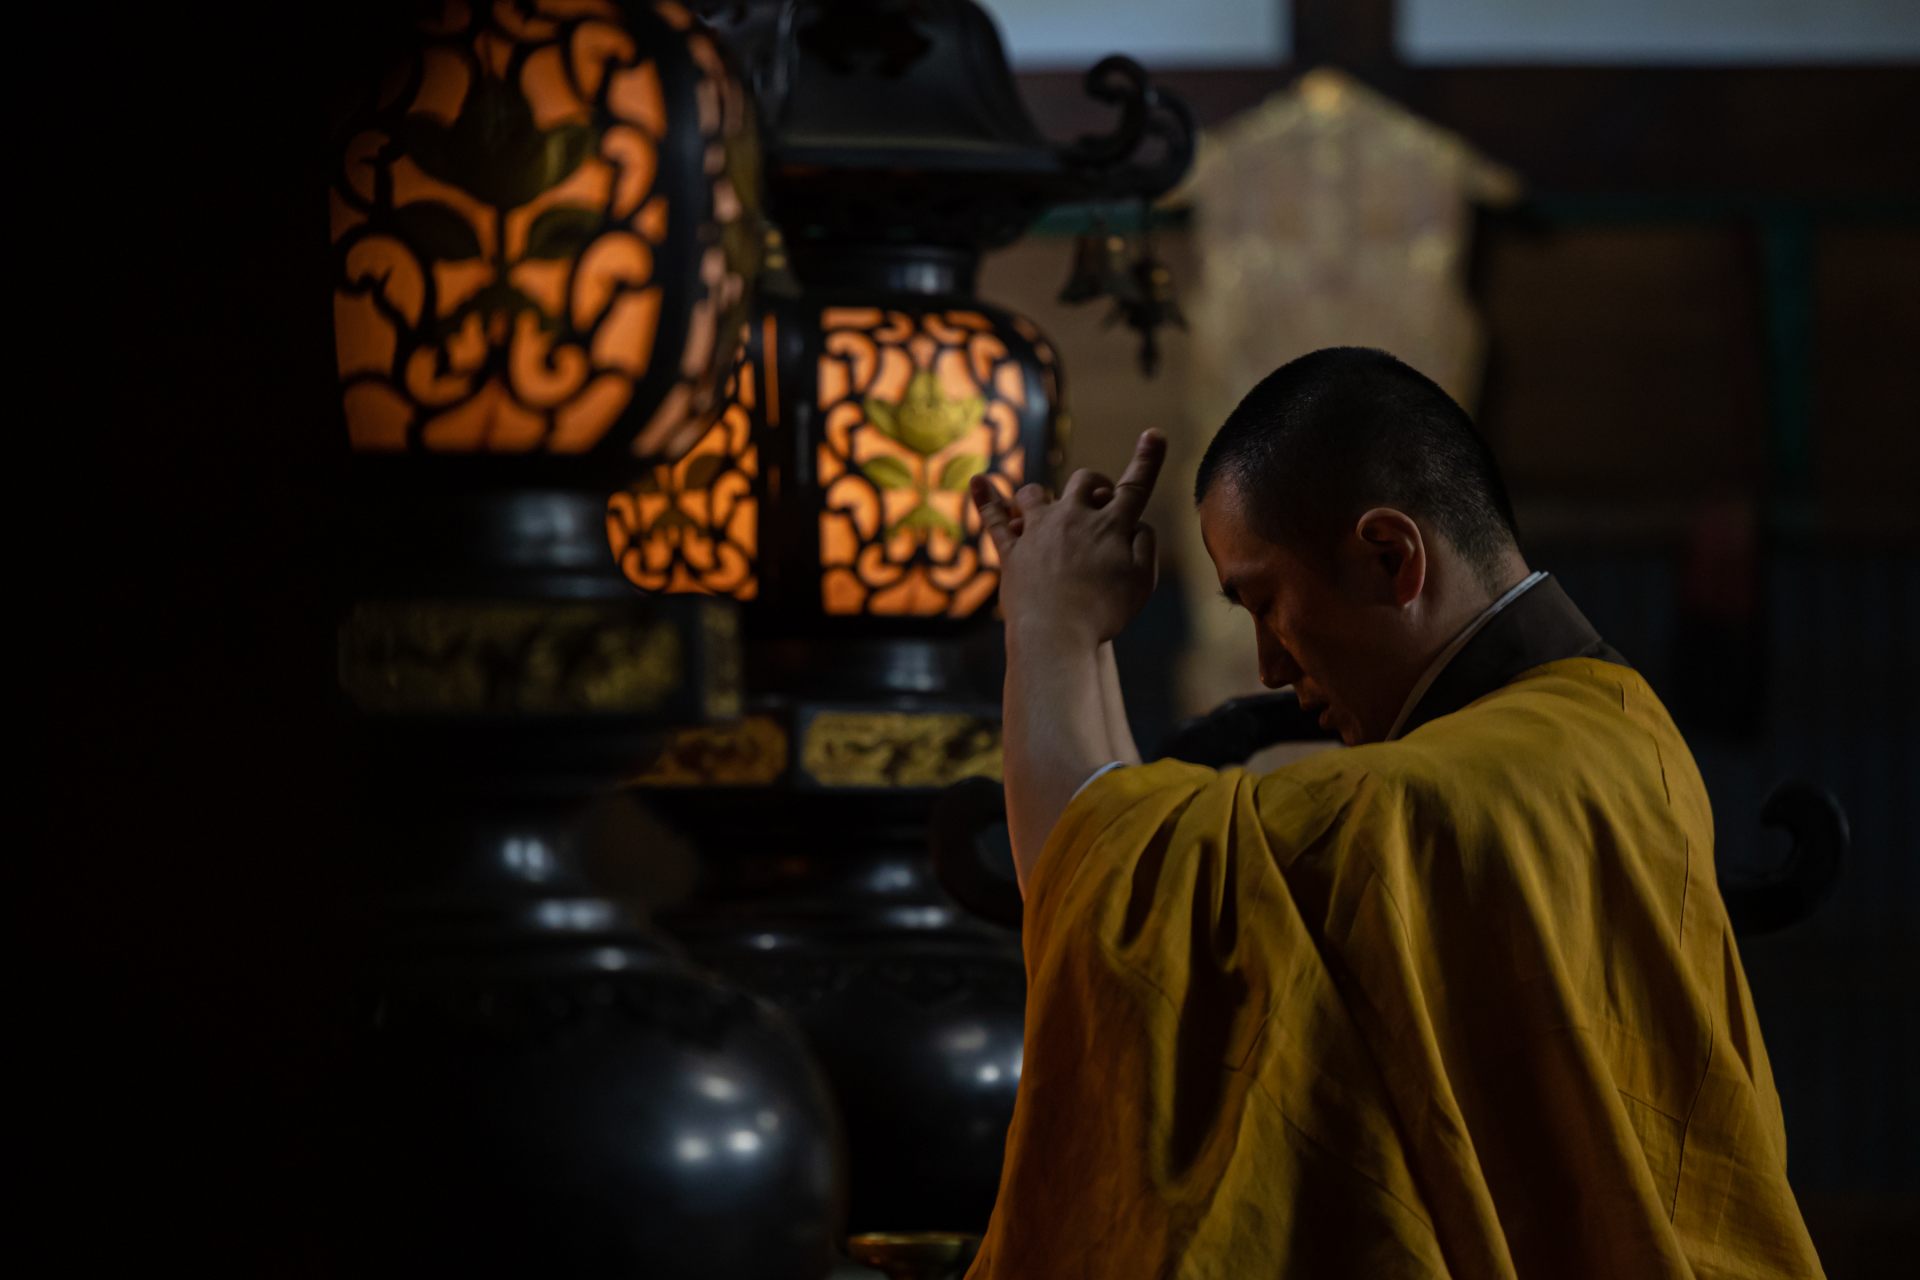 The reading of the scripture is carried out by a priest in accordance with the practices of Tendai Esoteric Buddhism.